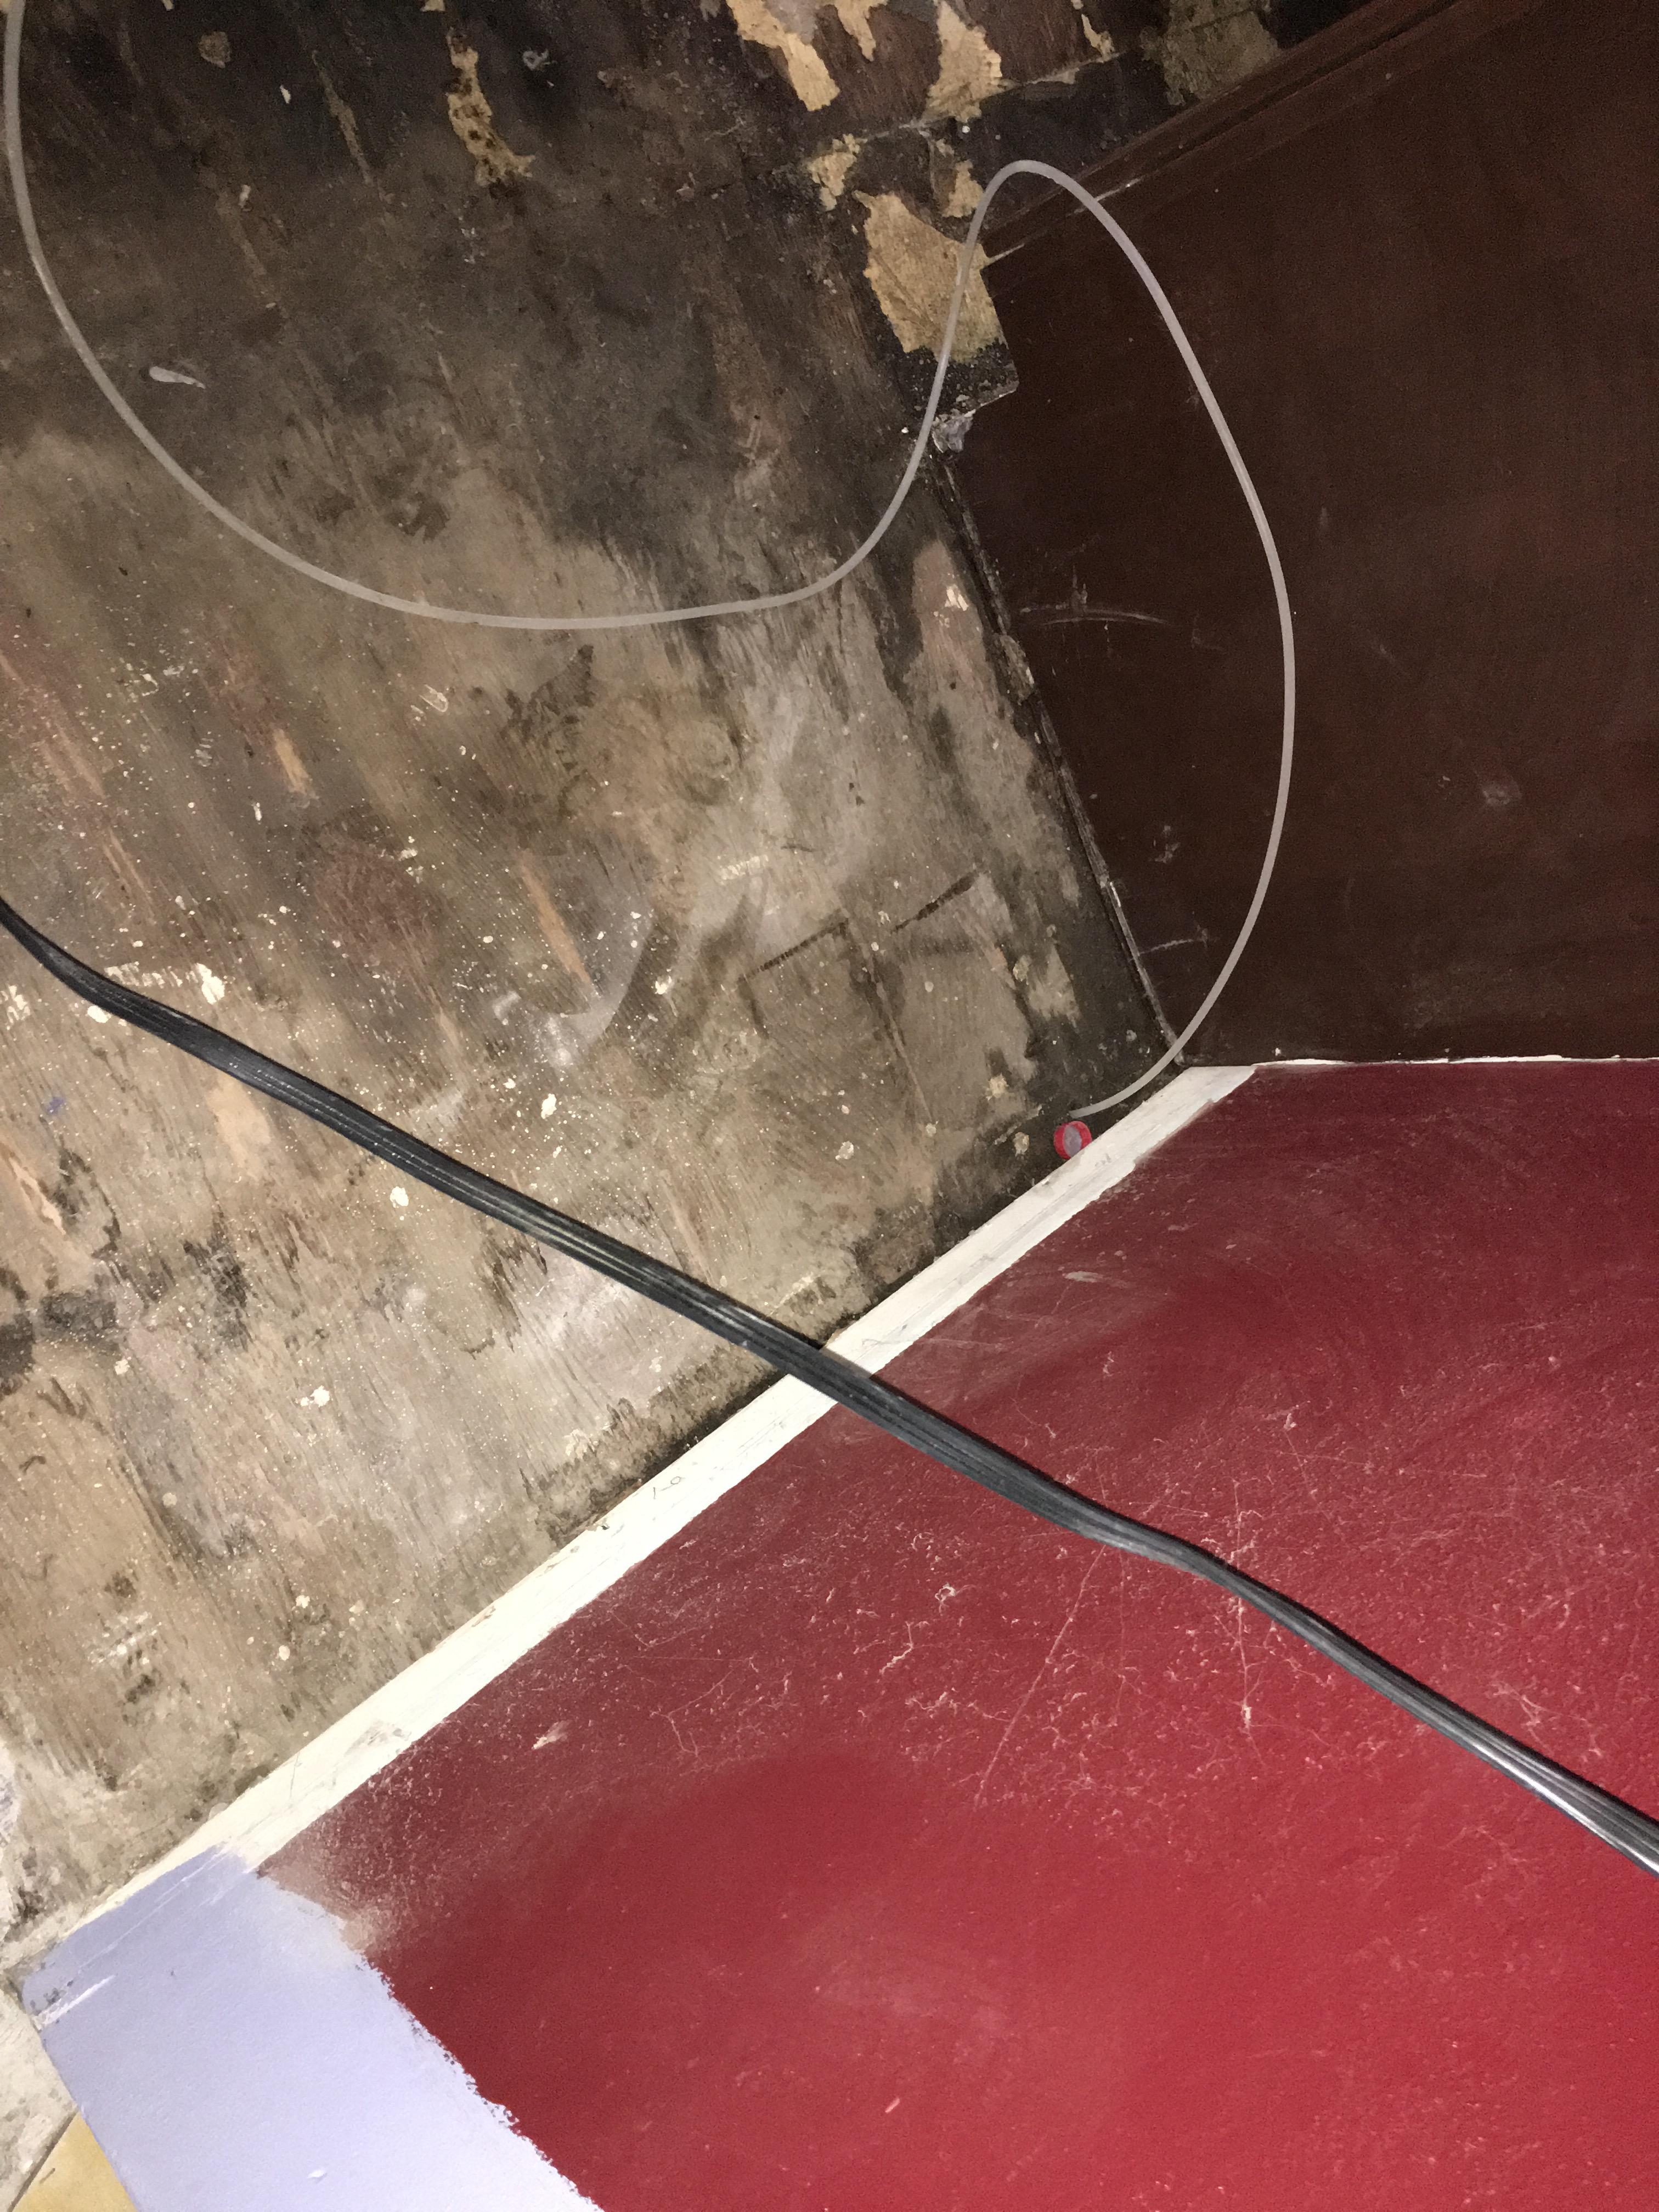 Floors ruined due to a mold outbreak.